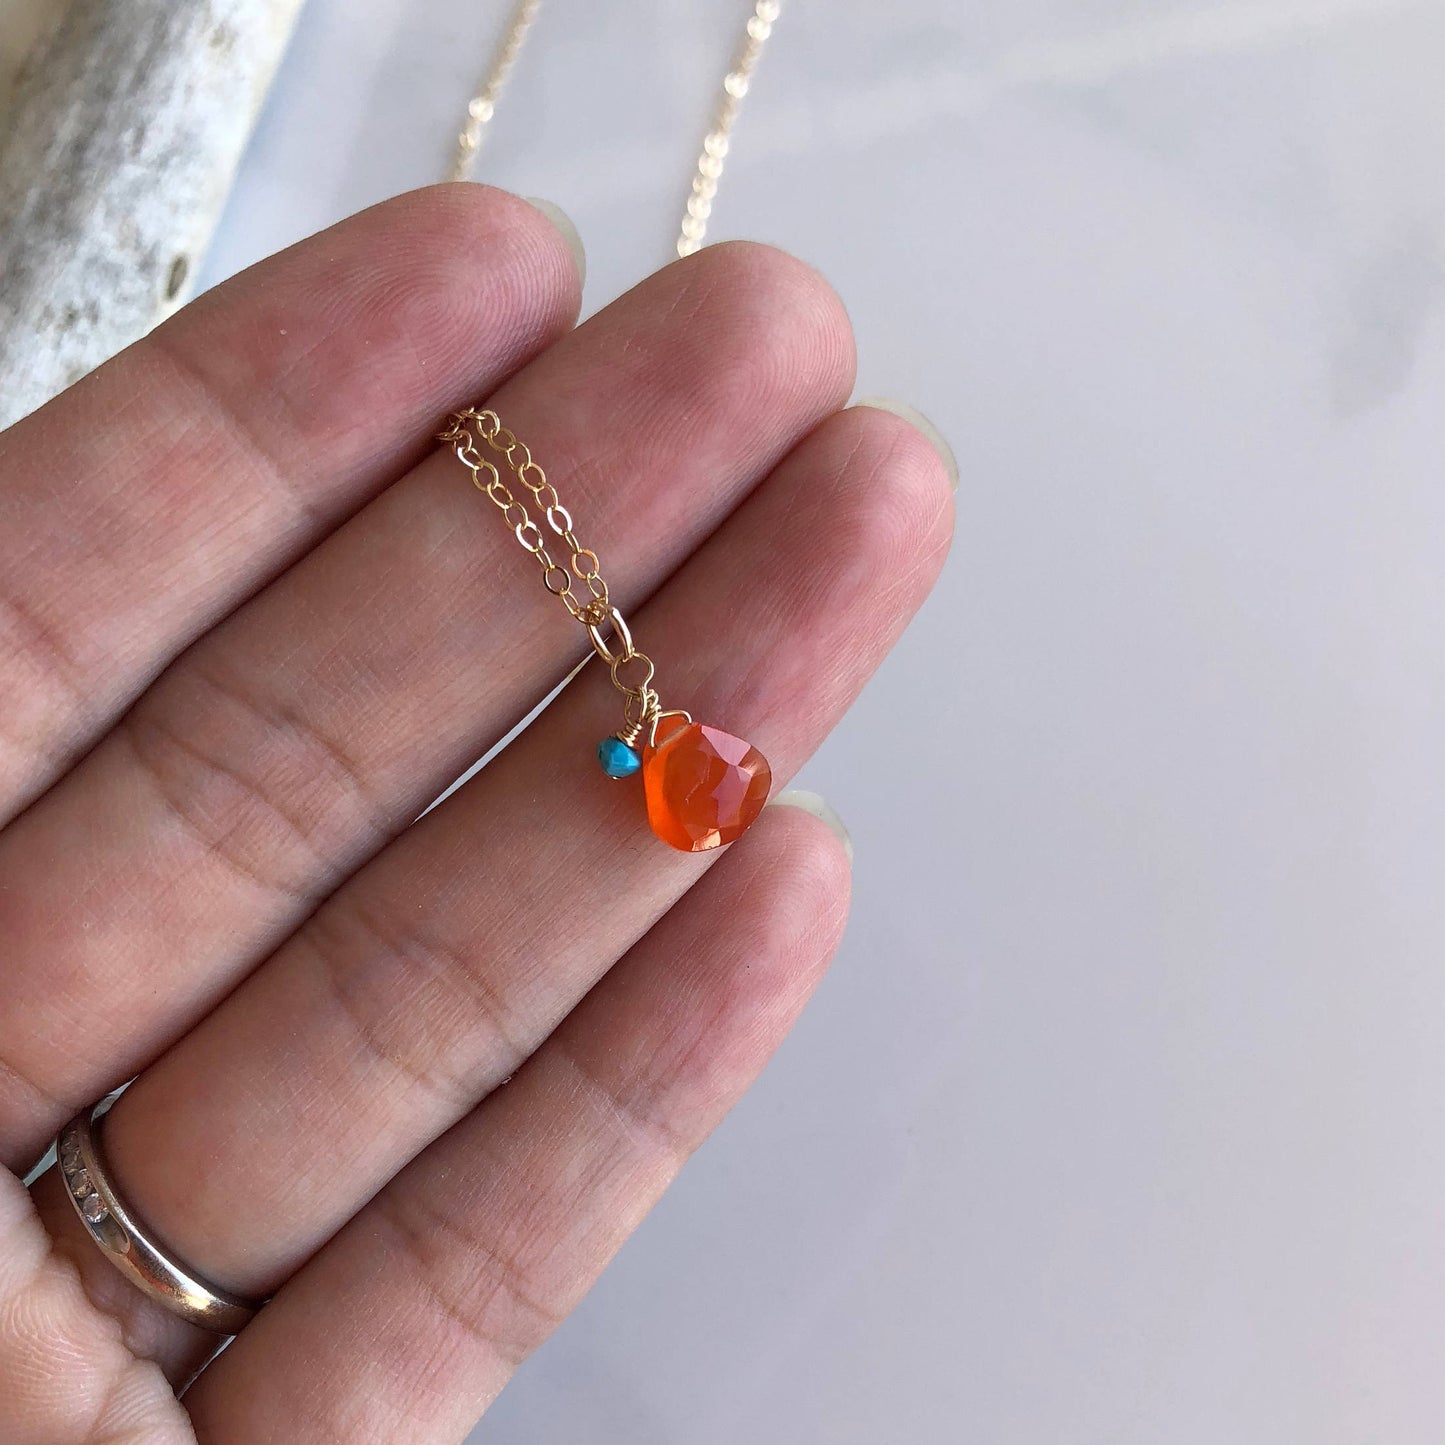 Dainty carnelian and turquoise pendant necklace